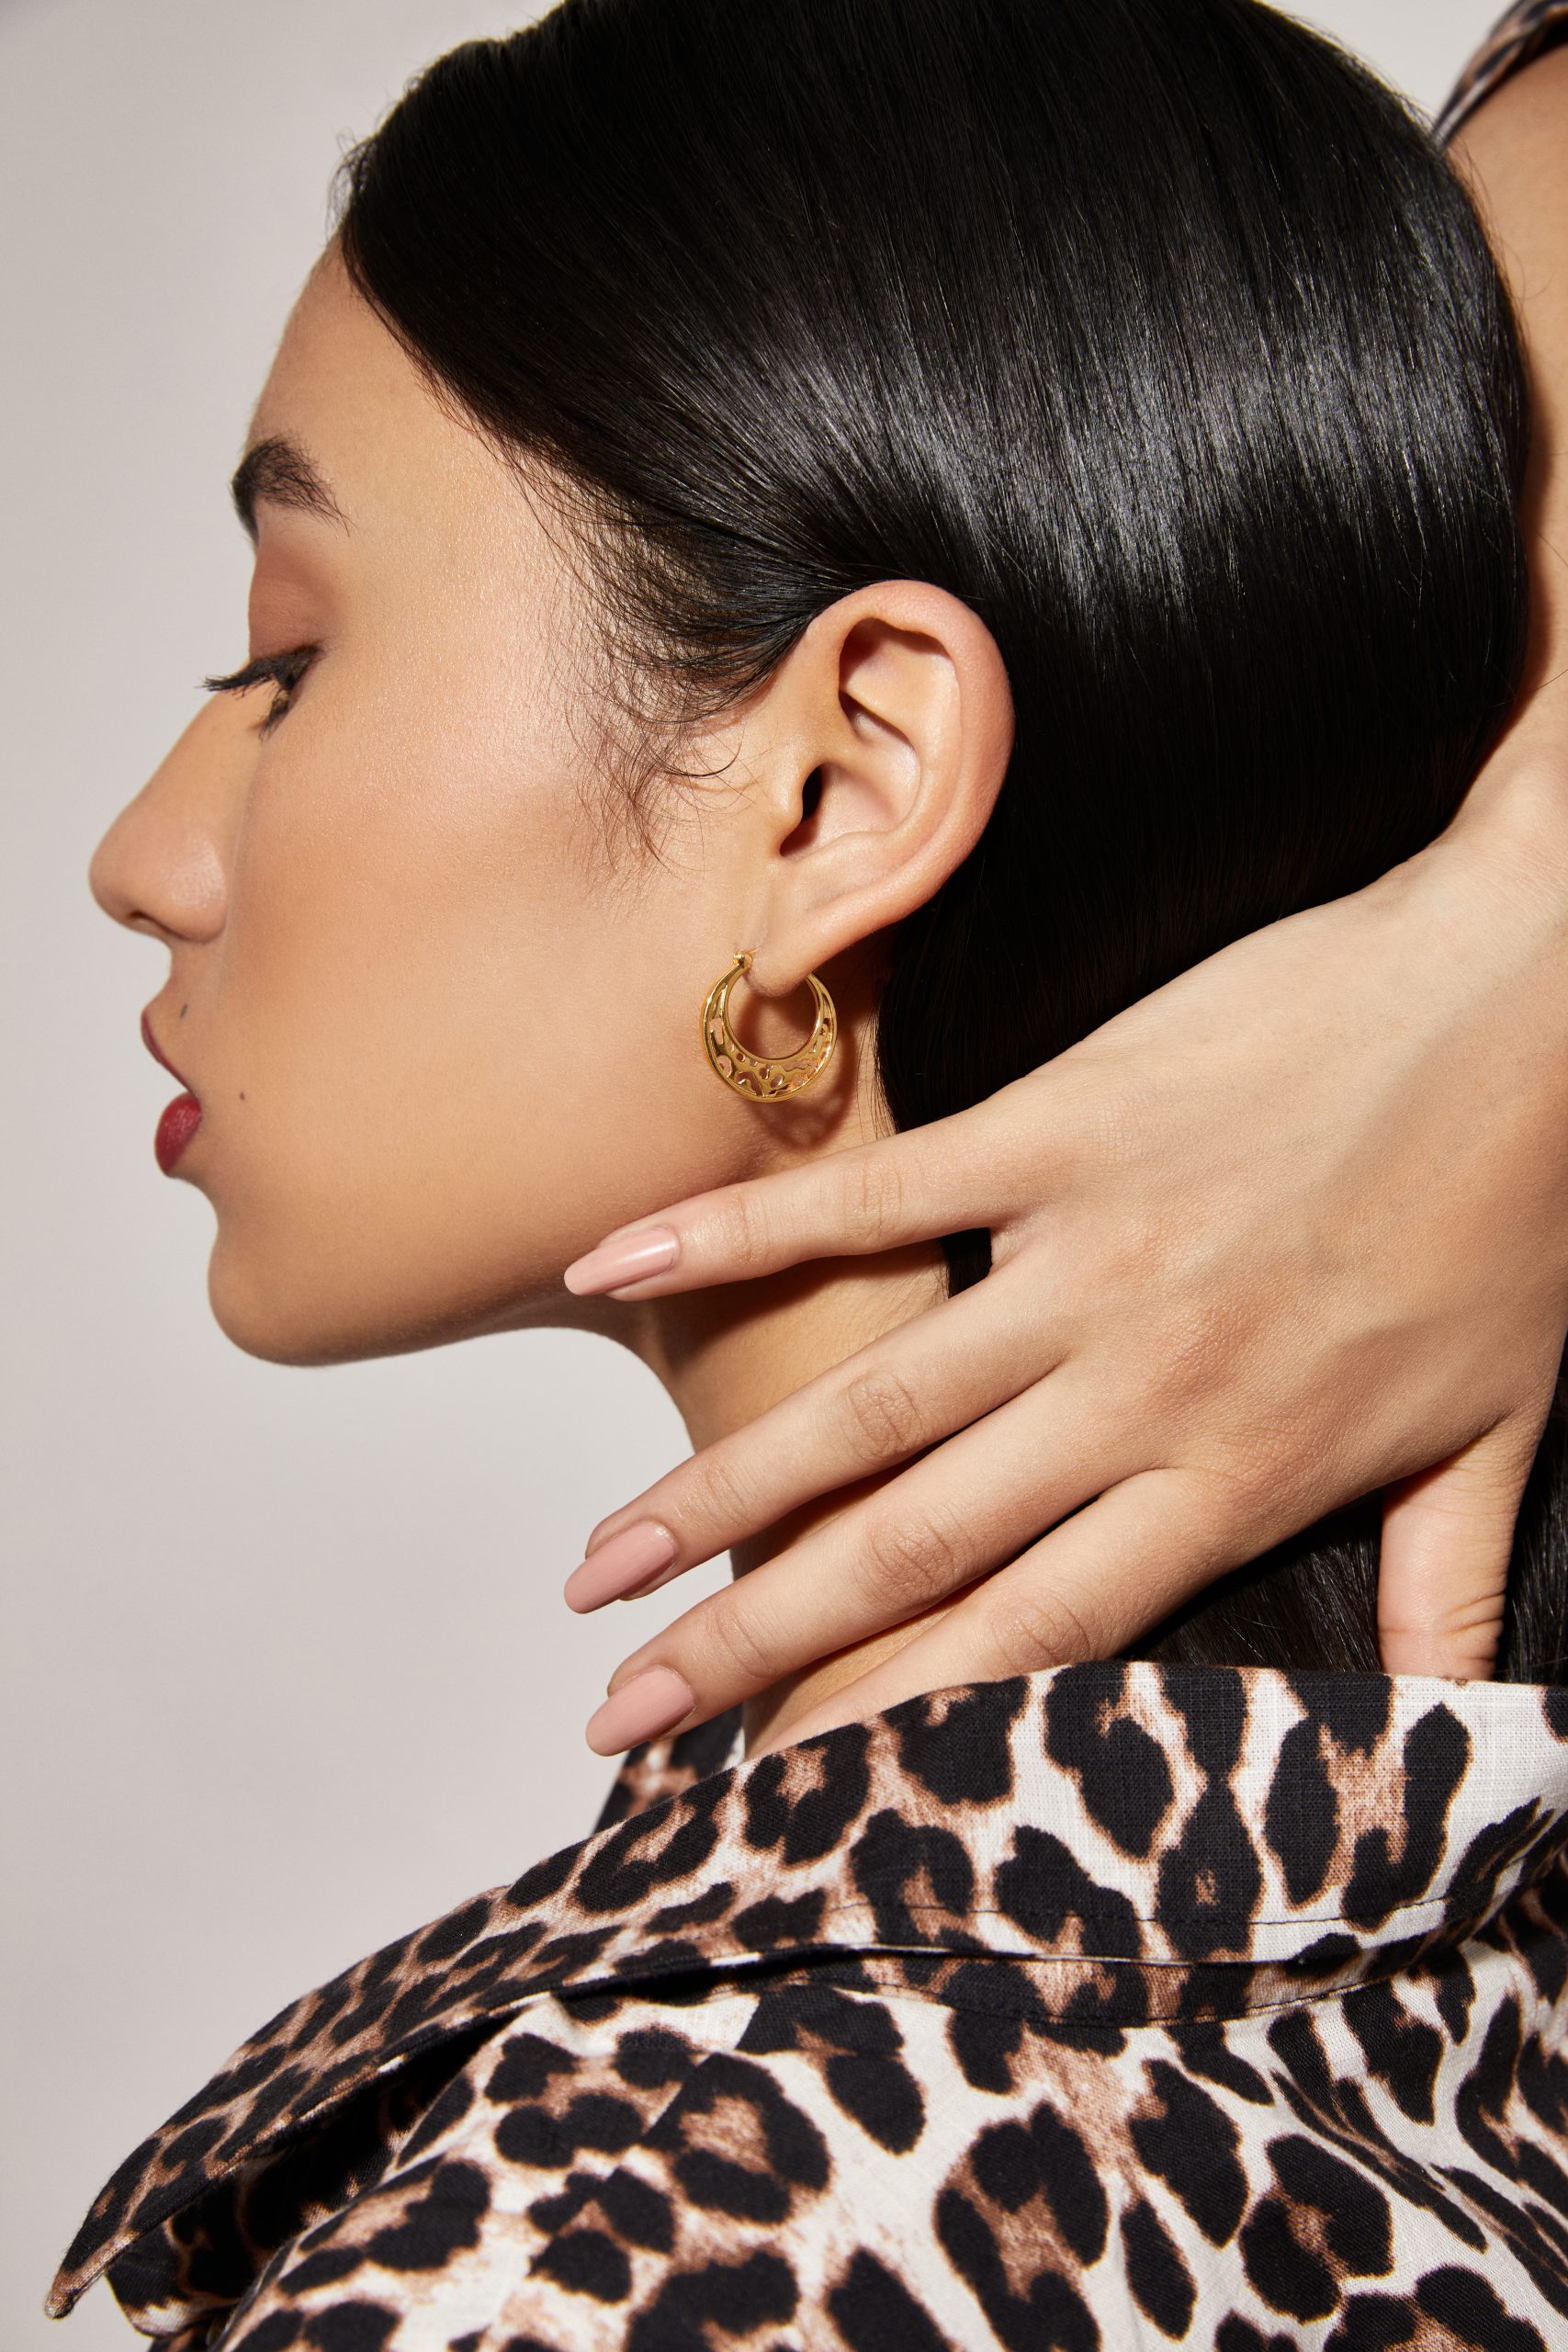 The Clawed Chic Hoops